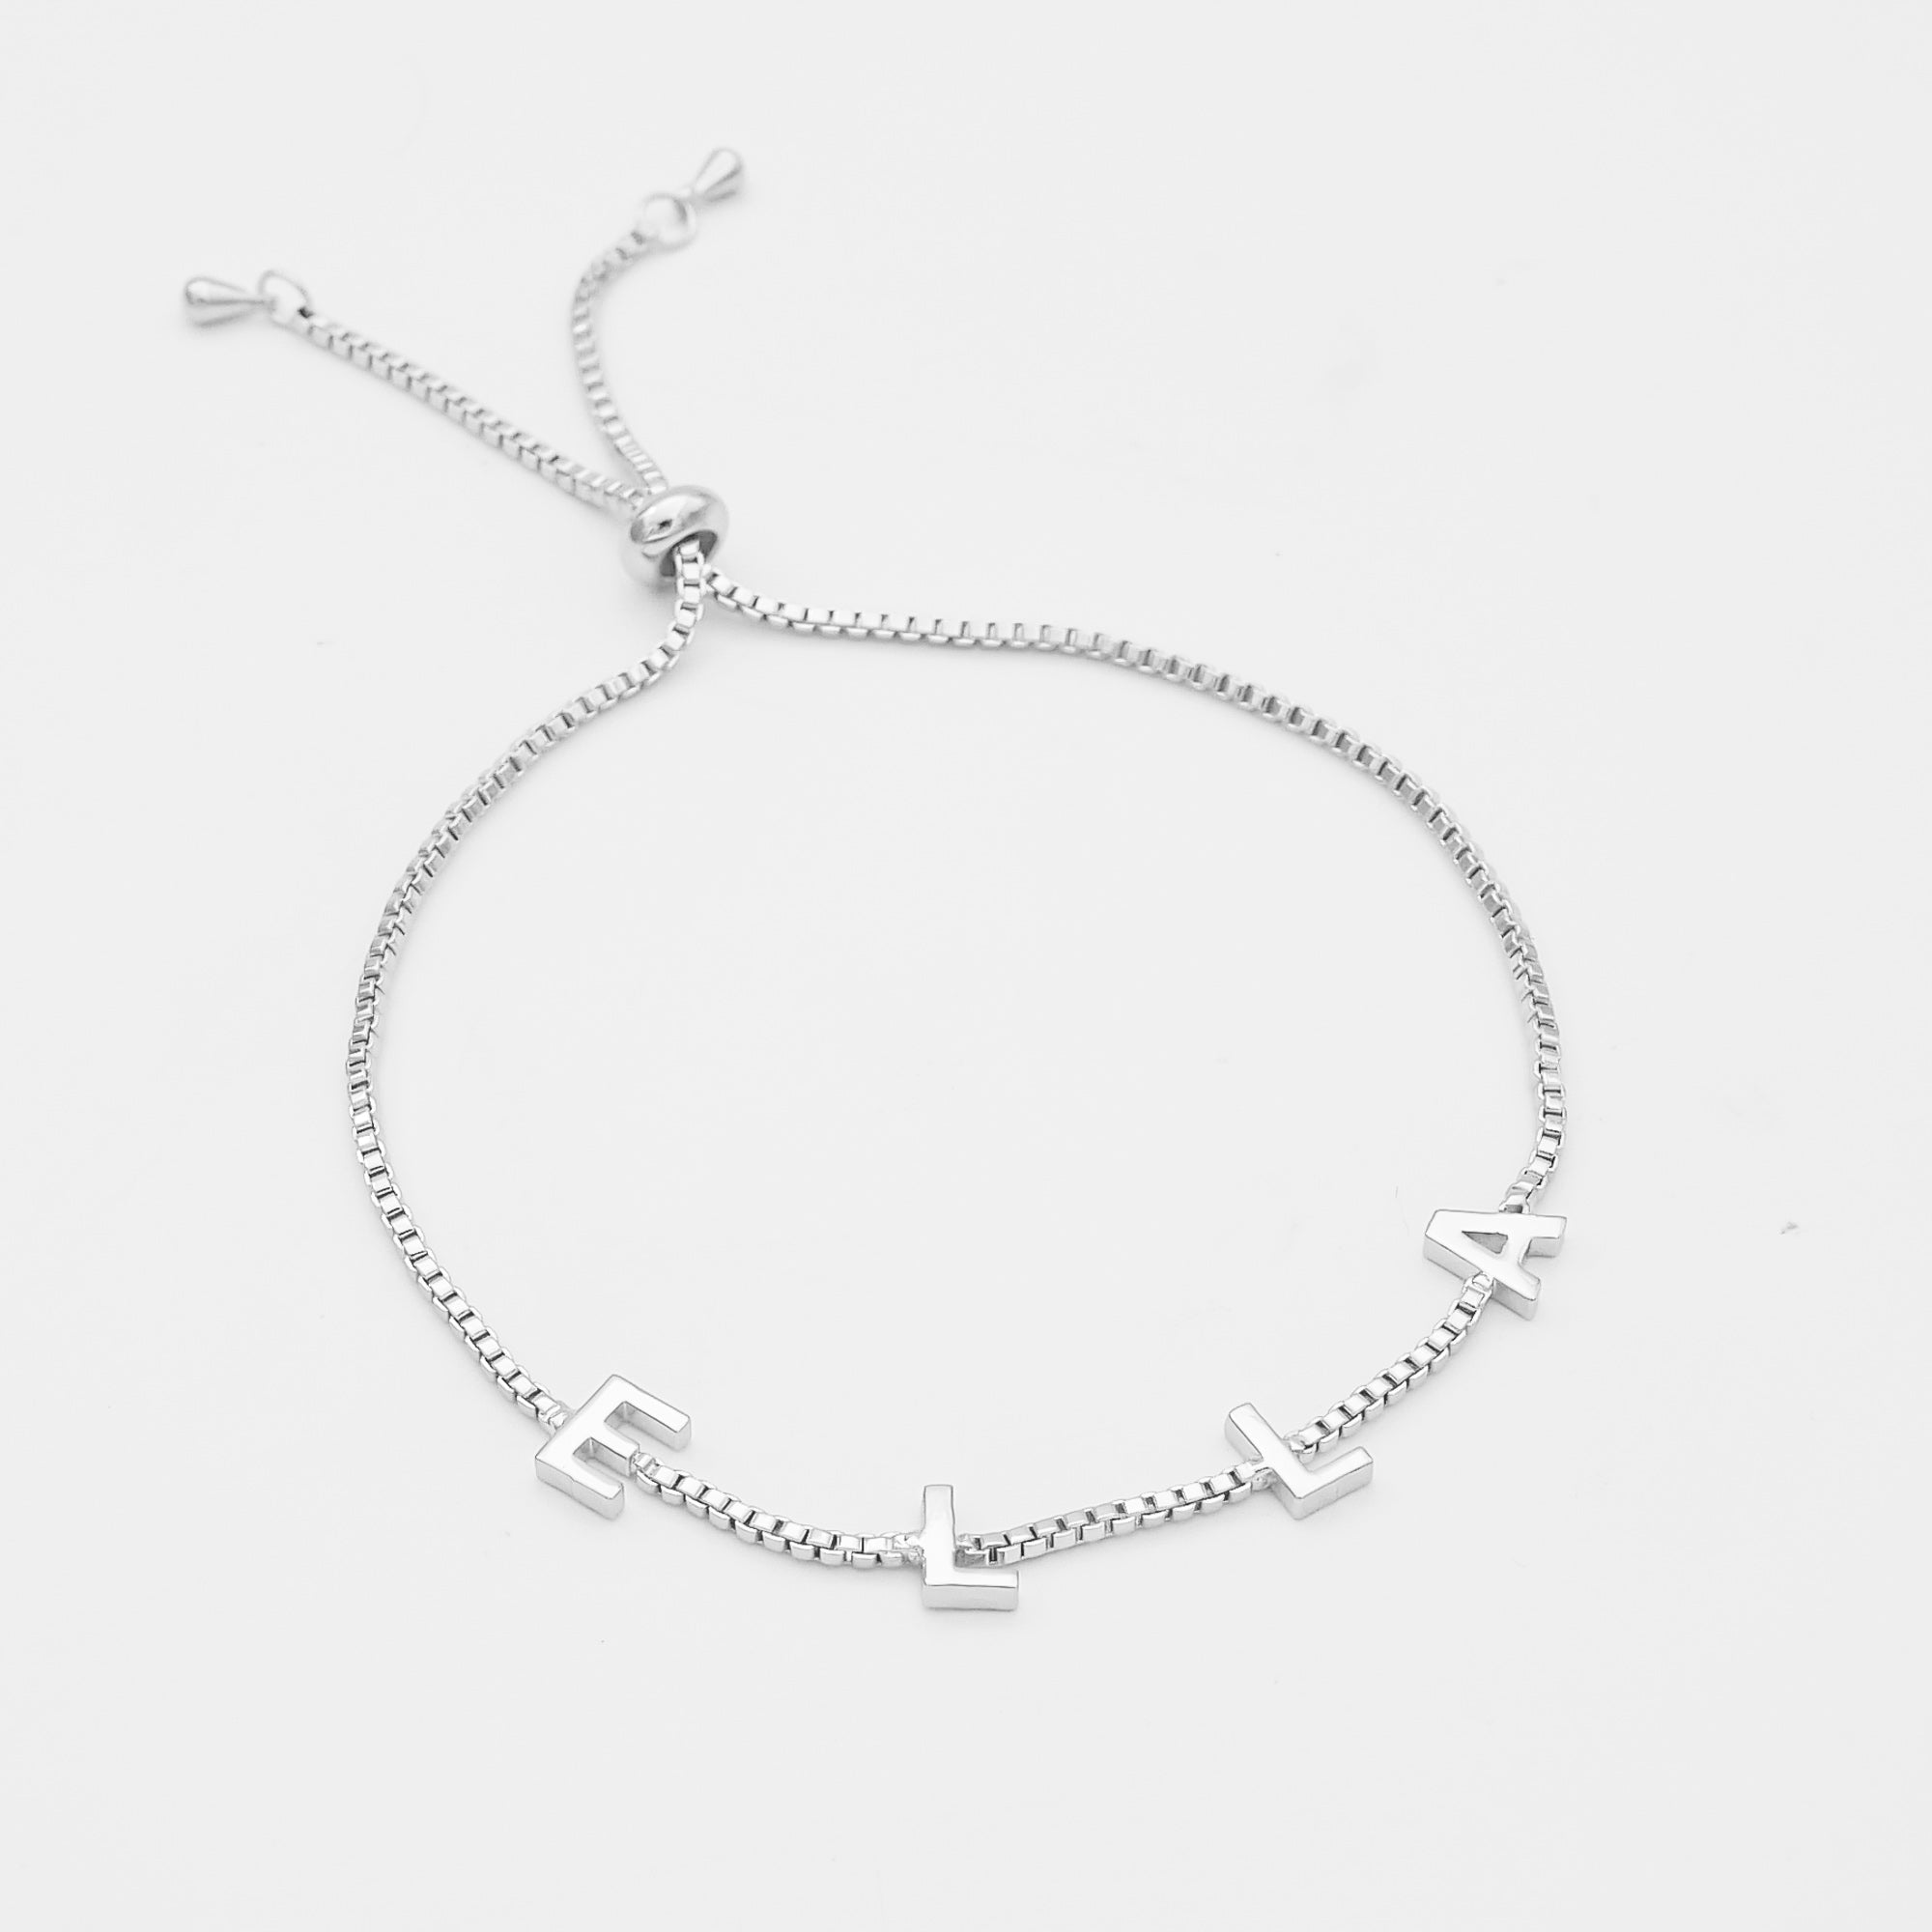 Classic personalised name bracelet in Silver with charm